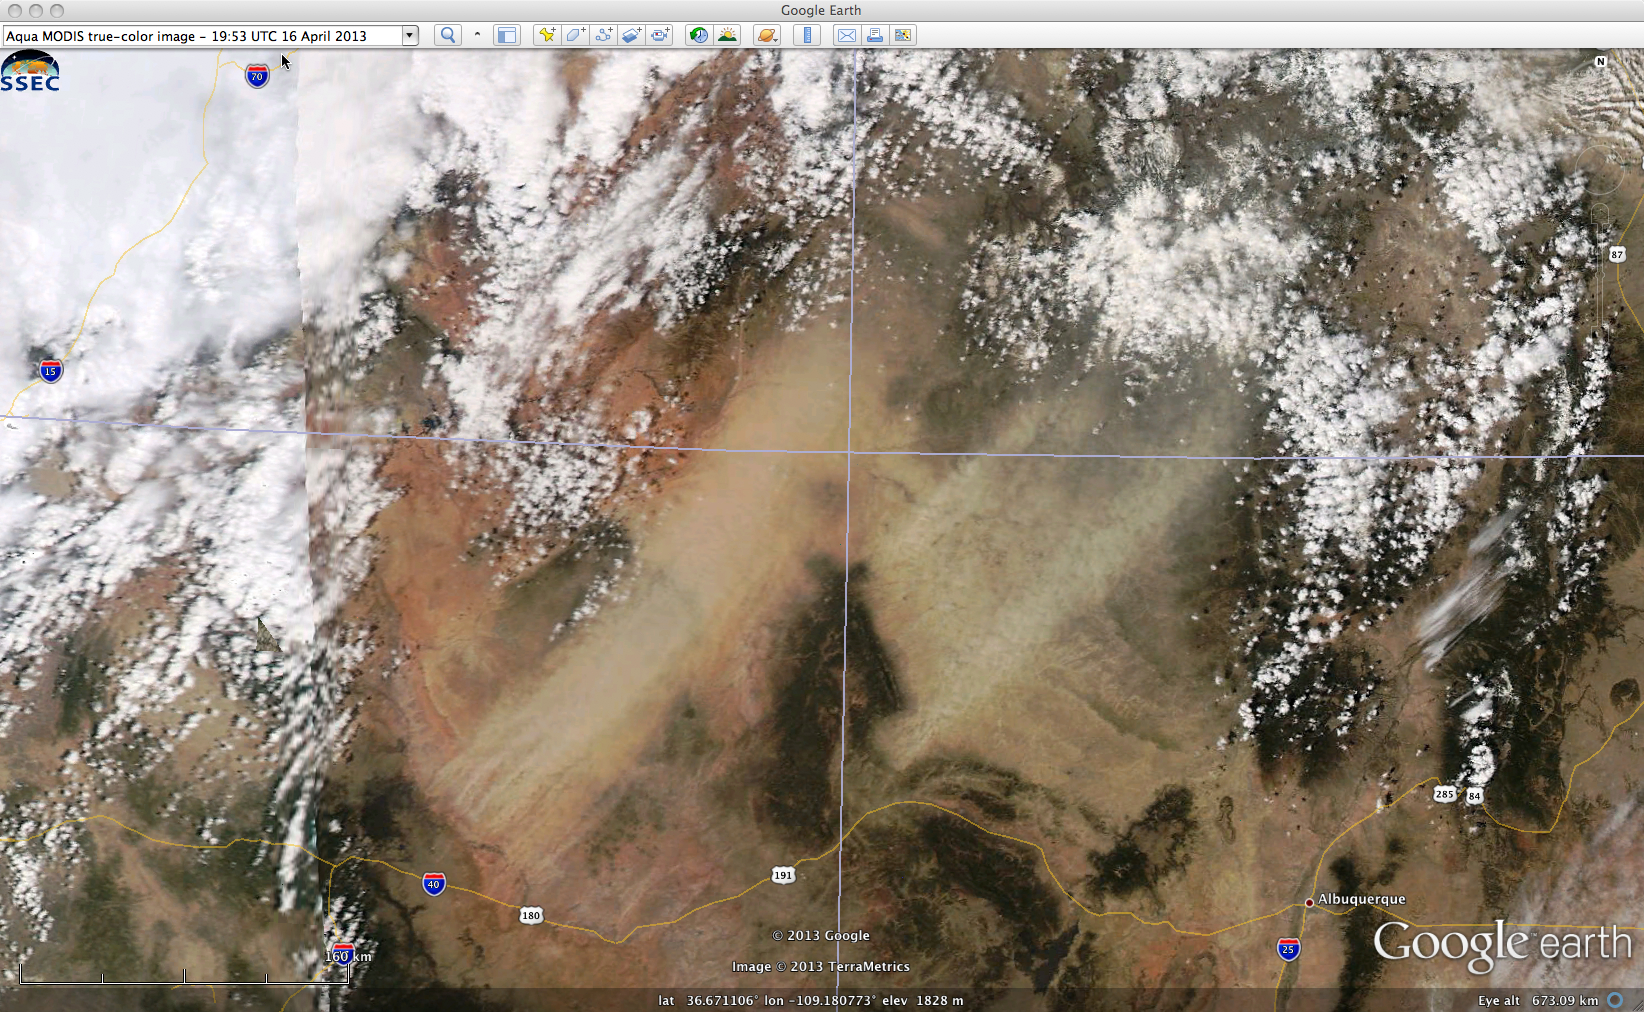 MODIS true-color Red/Green/Blue (RGB) image (displayed using Google Earth)